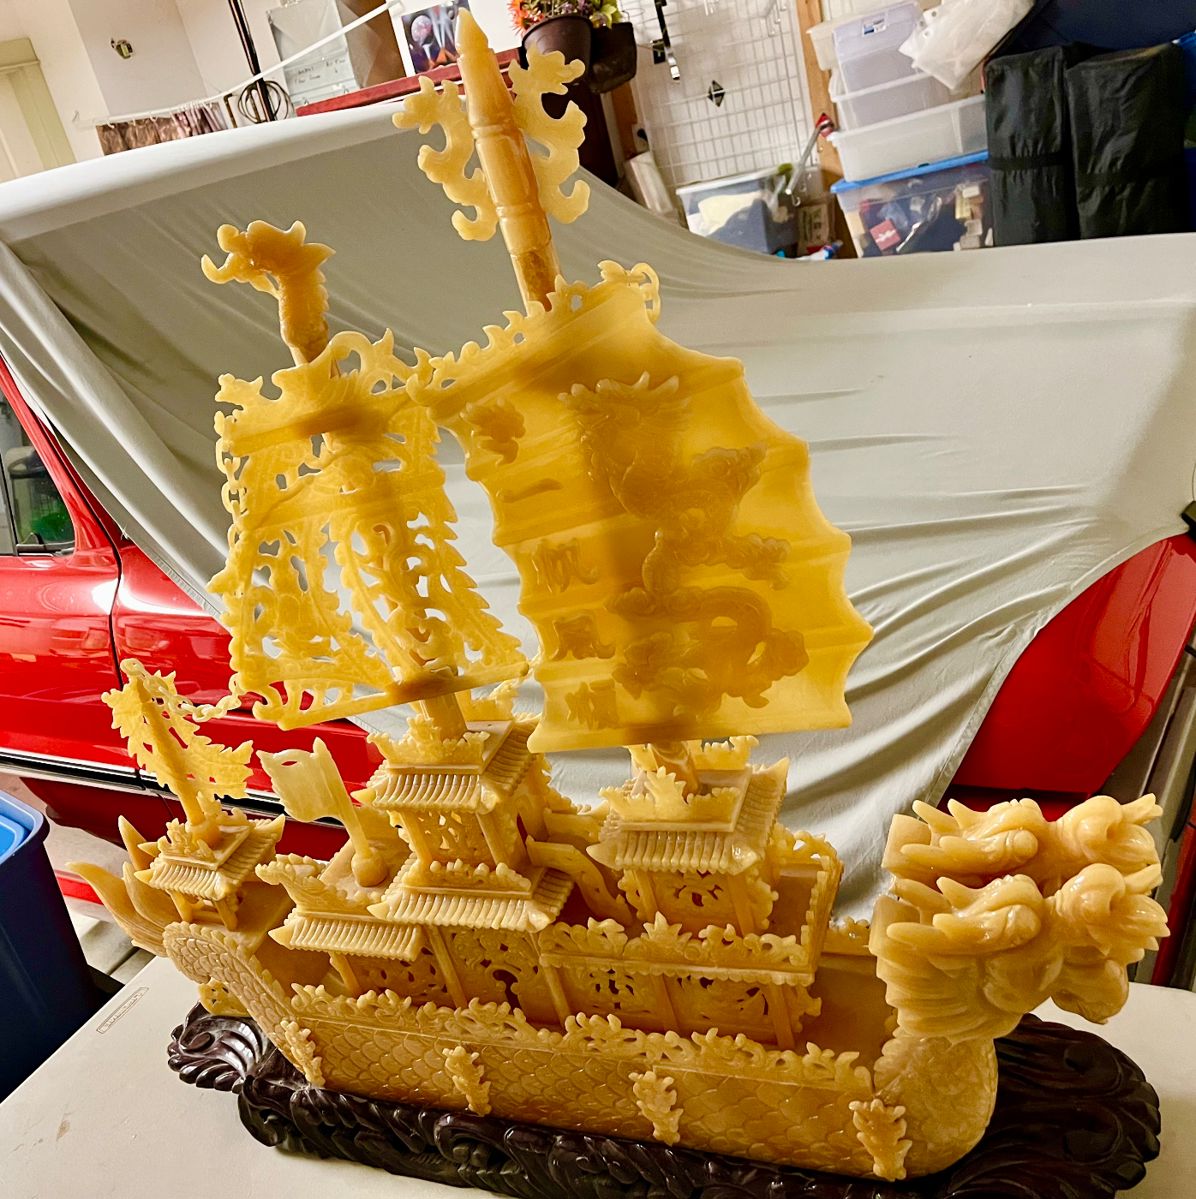 Chinese exquisite Yellow Jade STONE fengshui Carved Dragon Boat ship Statue 3.5ft L ×3ft H This is so beautiful, 
Yellow Jade stone Dragon Boat / Ship 3ft long x 3ft tall  $295  is a fraction of what it’s worth Hand carved yellow, jade stone with rosewood platform,
The ship sails unscrew for easy  transport
